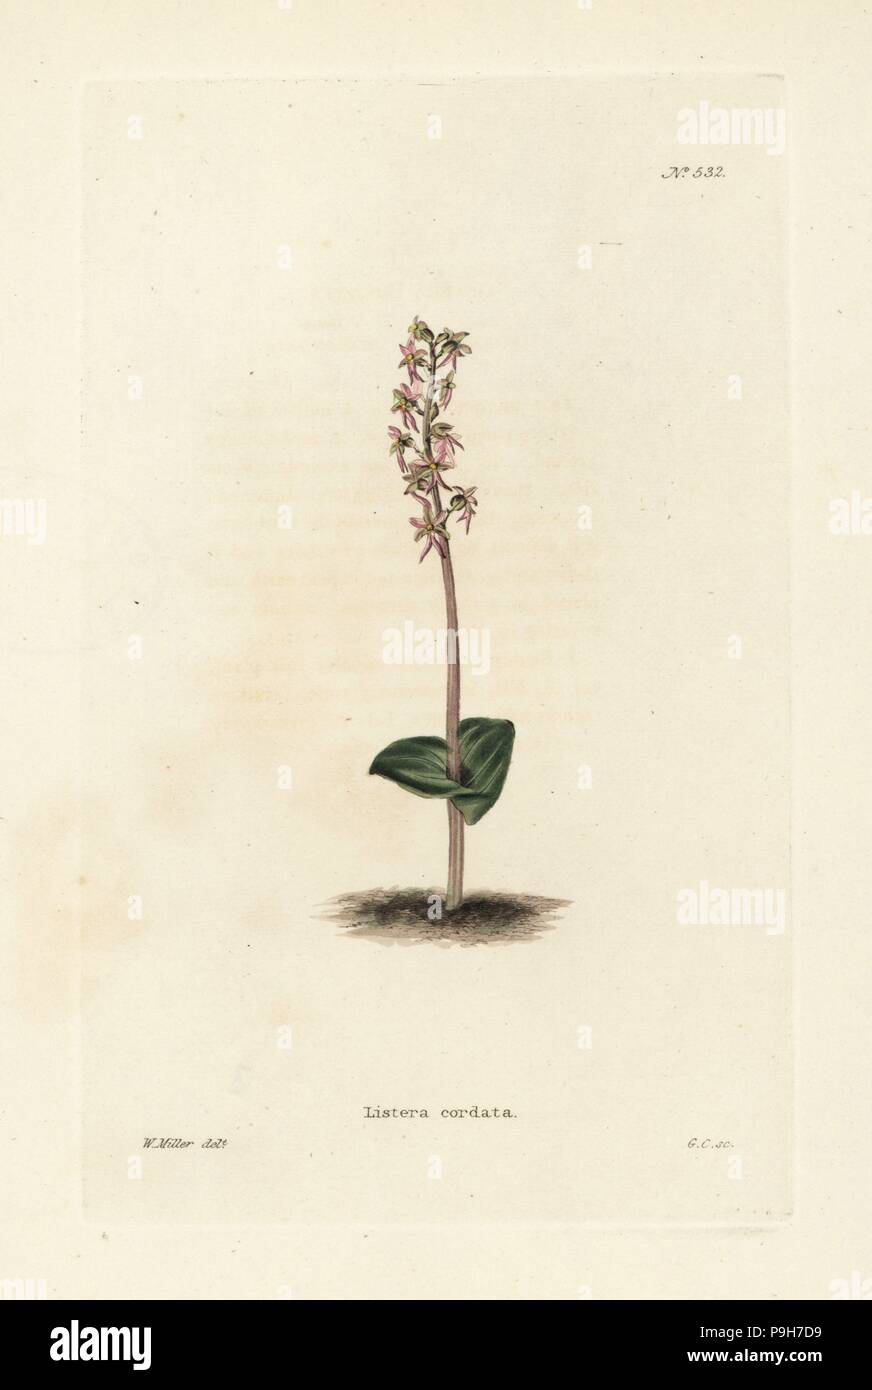 Lesser twayblade orchid, Neottia cordata (Listera cordata). Handcoloured copperplate engraving by George Cooke after an illustration by William Miller from Conrad Loddiges' Botanical Cabinet, Hackney, London, 1821. Stock Photo